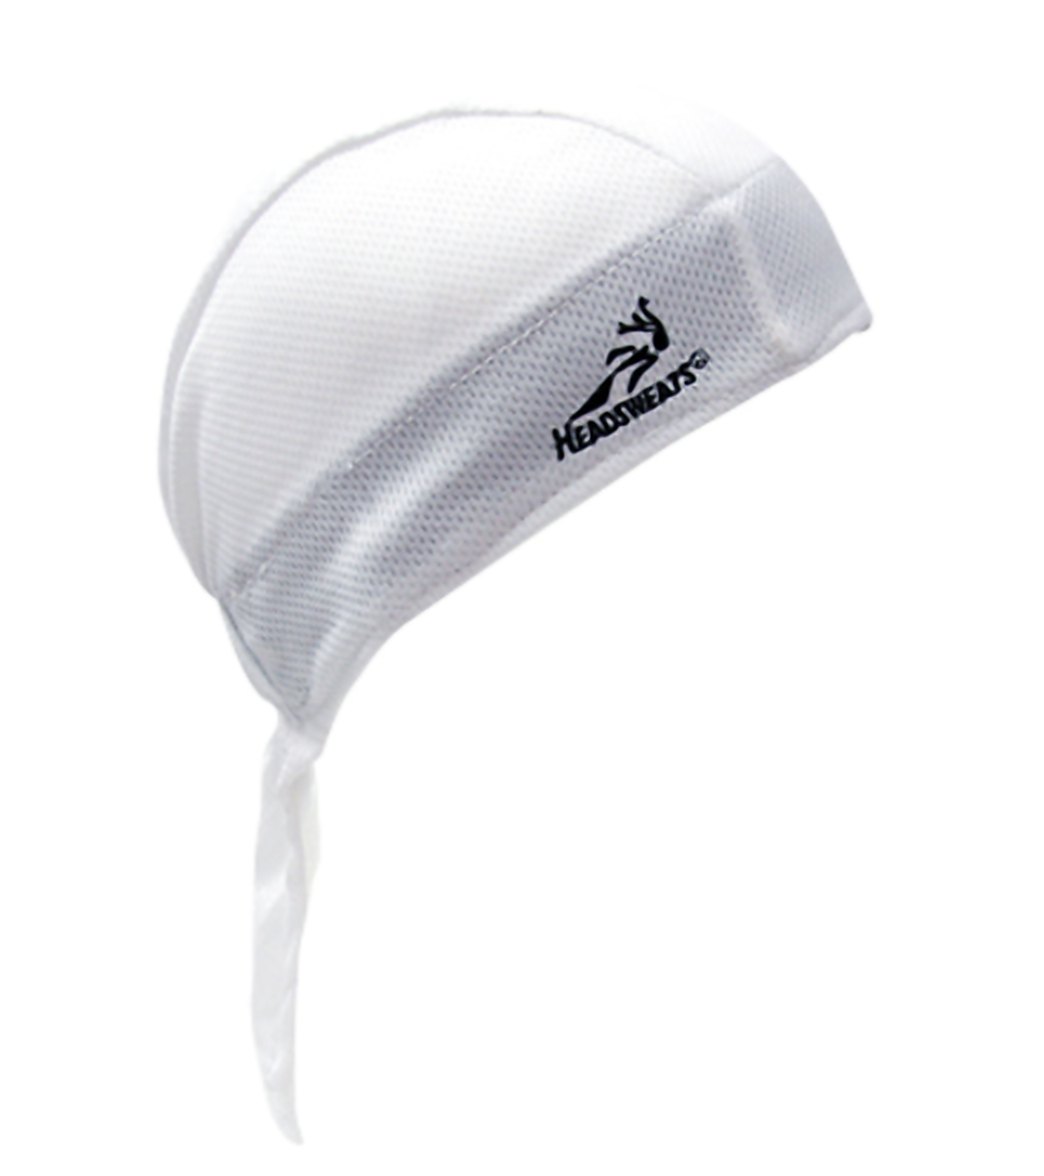 Headsweats Shorty - White Polyester - Swimoutlet.com